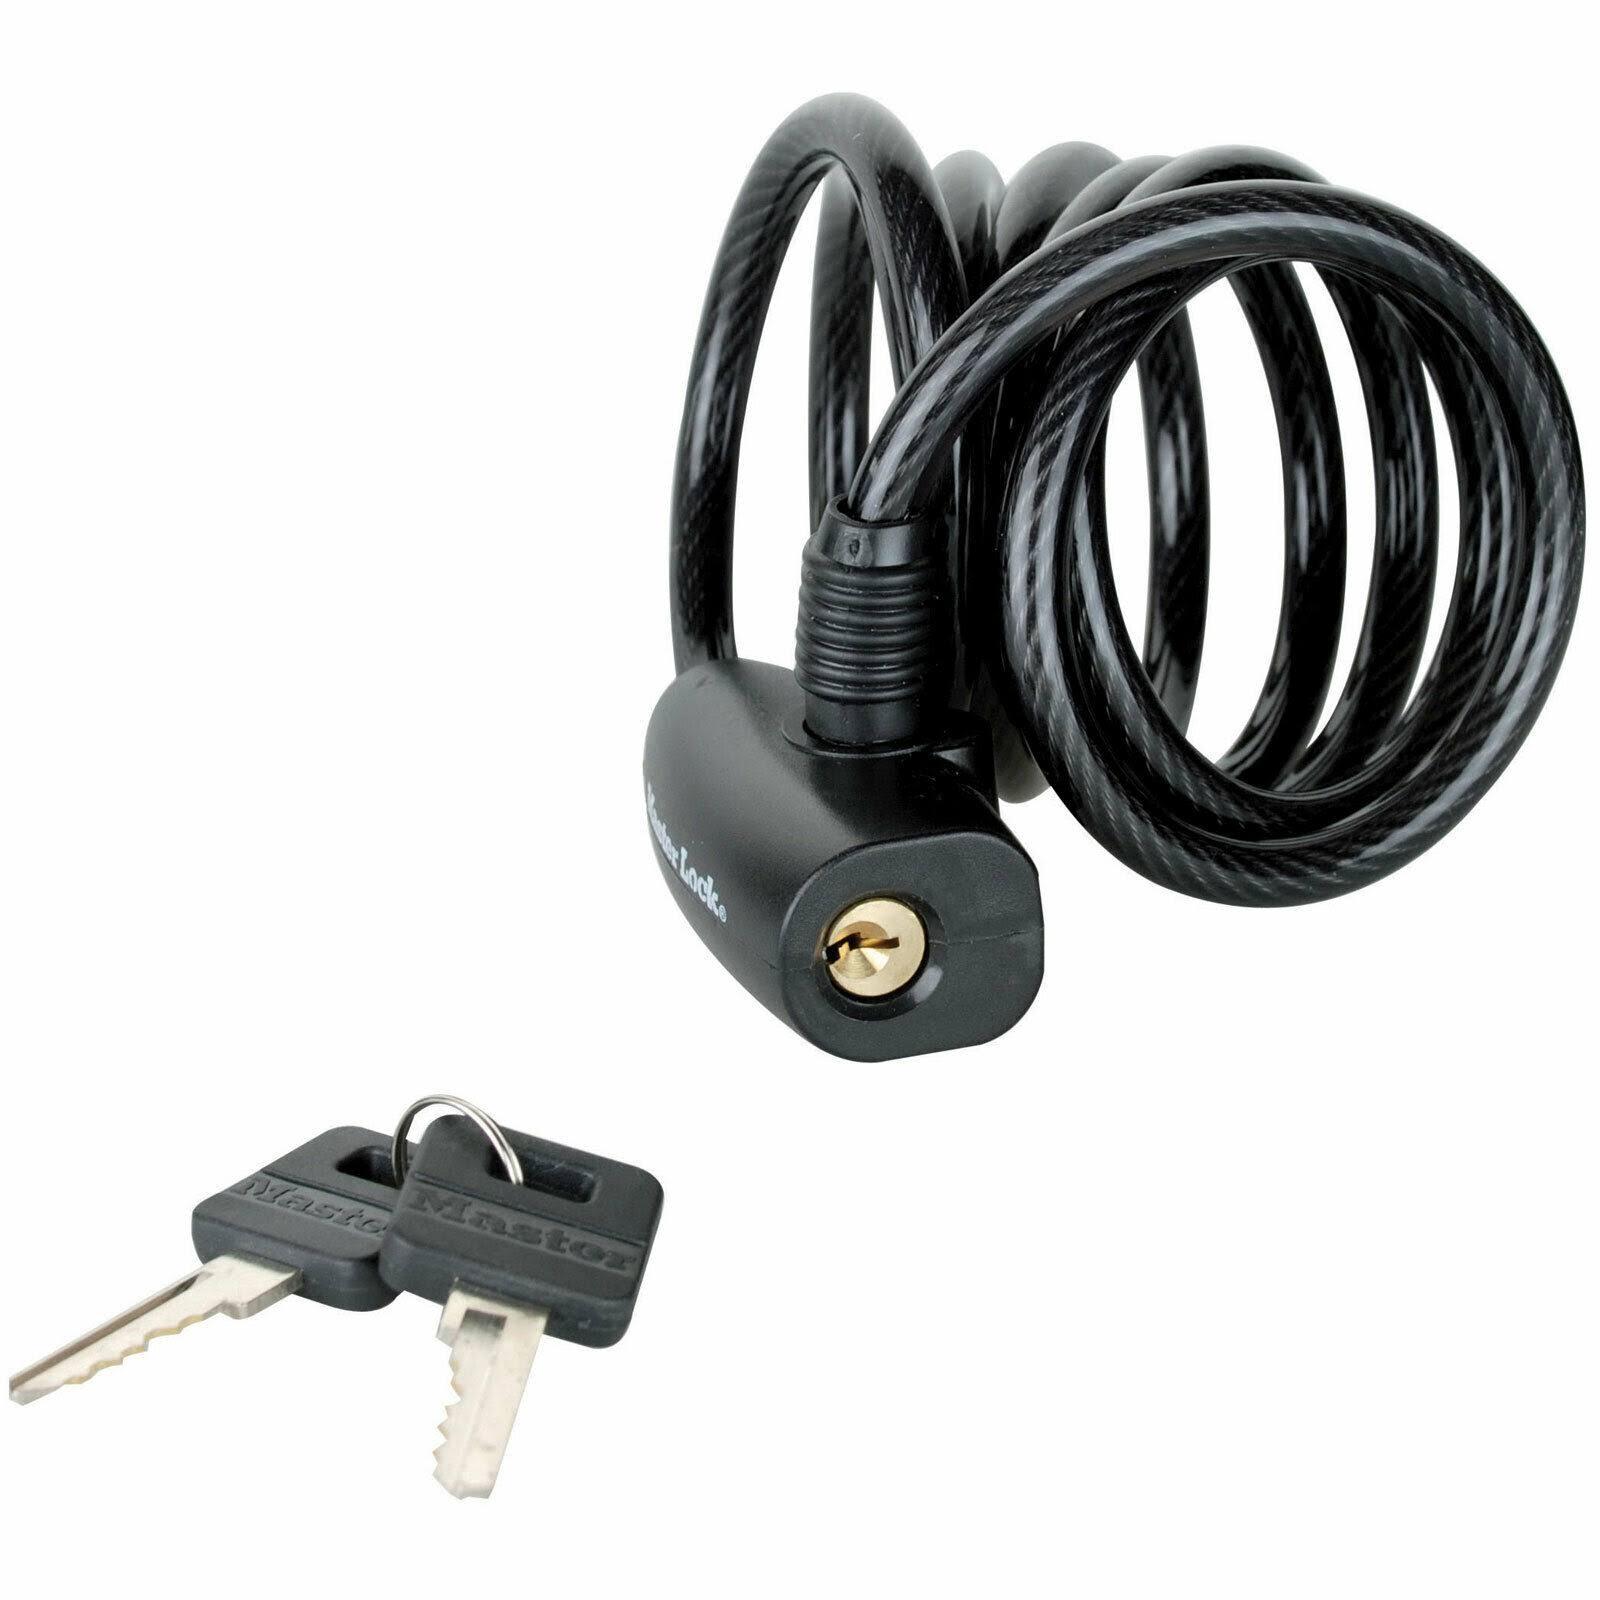 Master Lock Self Coiling Keyed Cable Lock